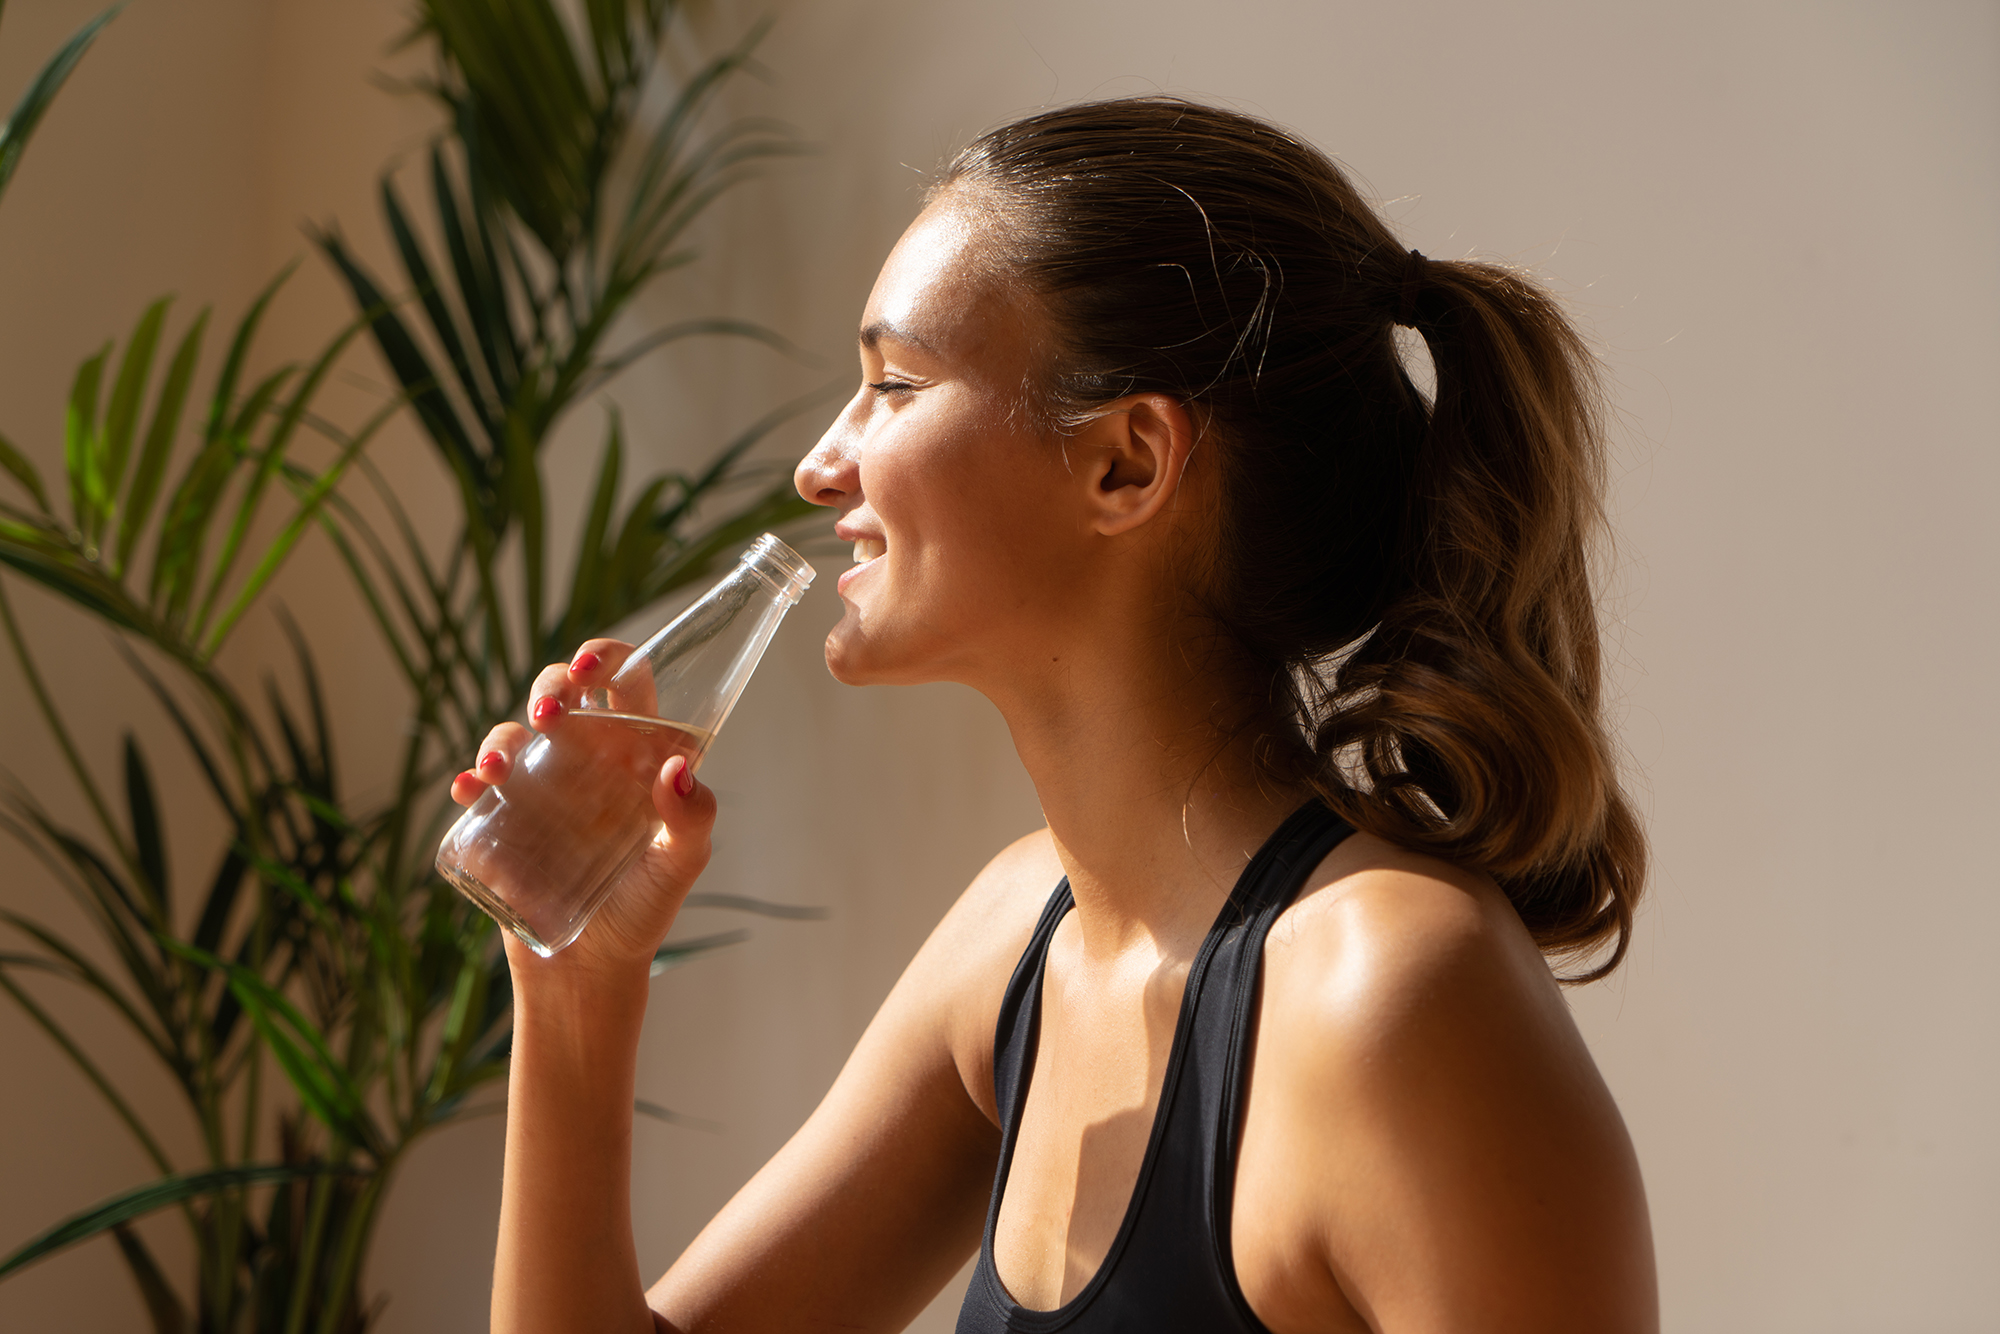 close up portait of sportswoman smiling, drinking water from bottle, natural light